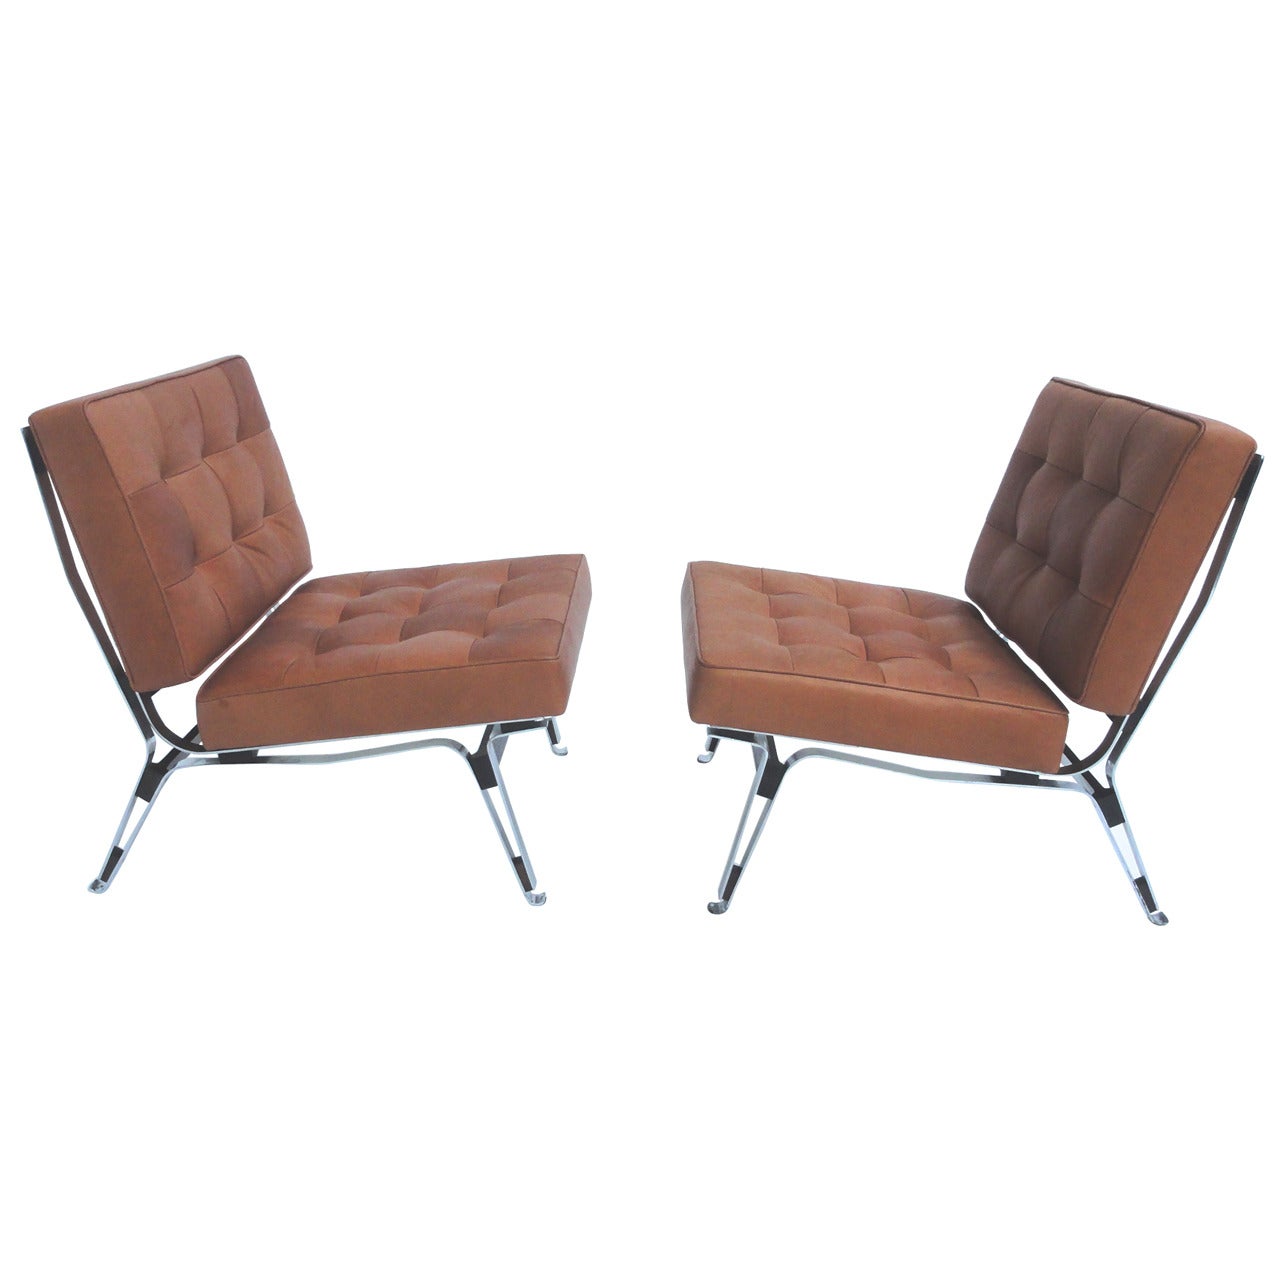 Beautiful Ico Parisi '856' Leather Lounge Chairs, Cassina, 1957 For Sale